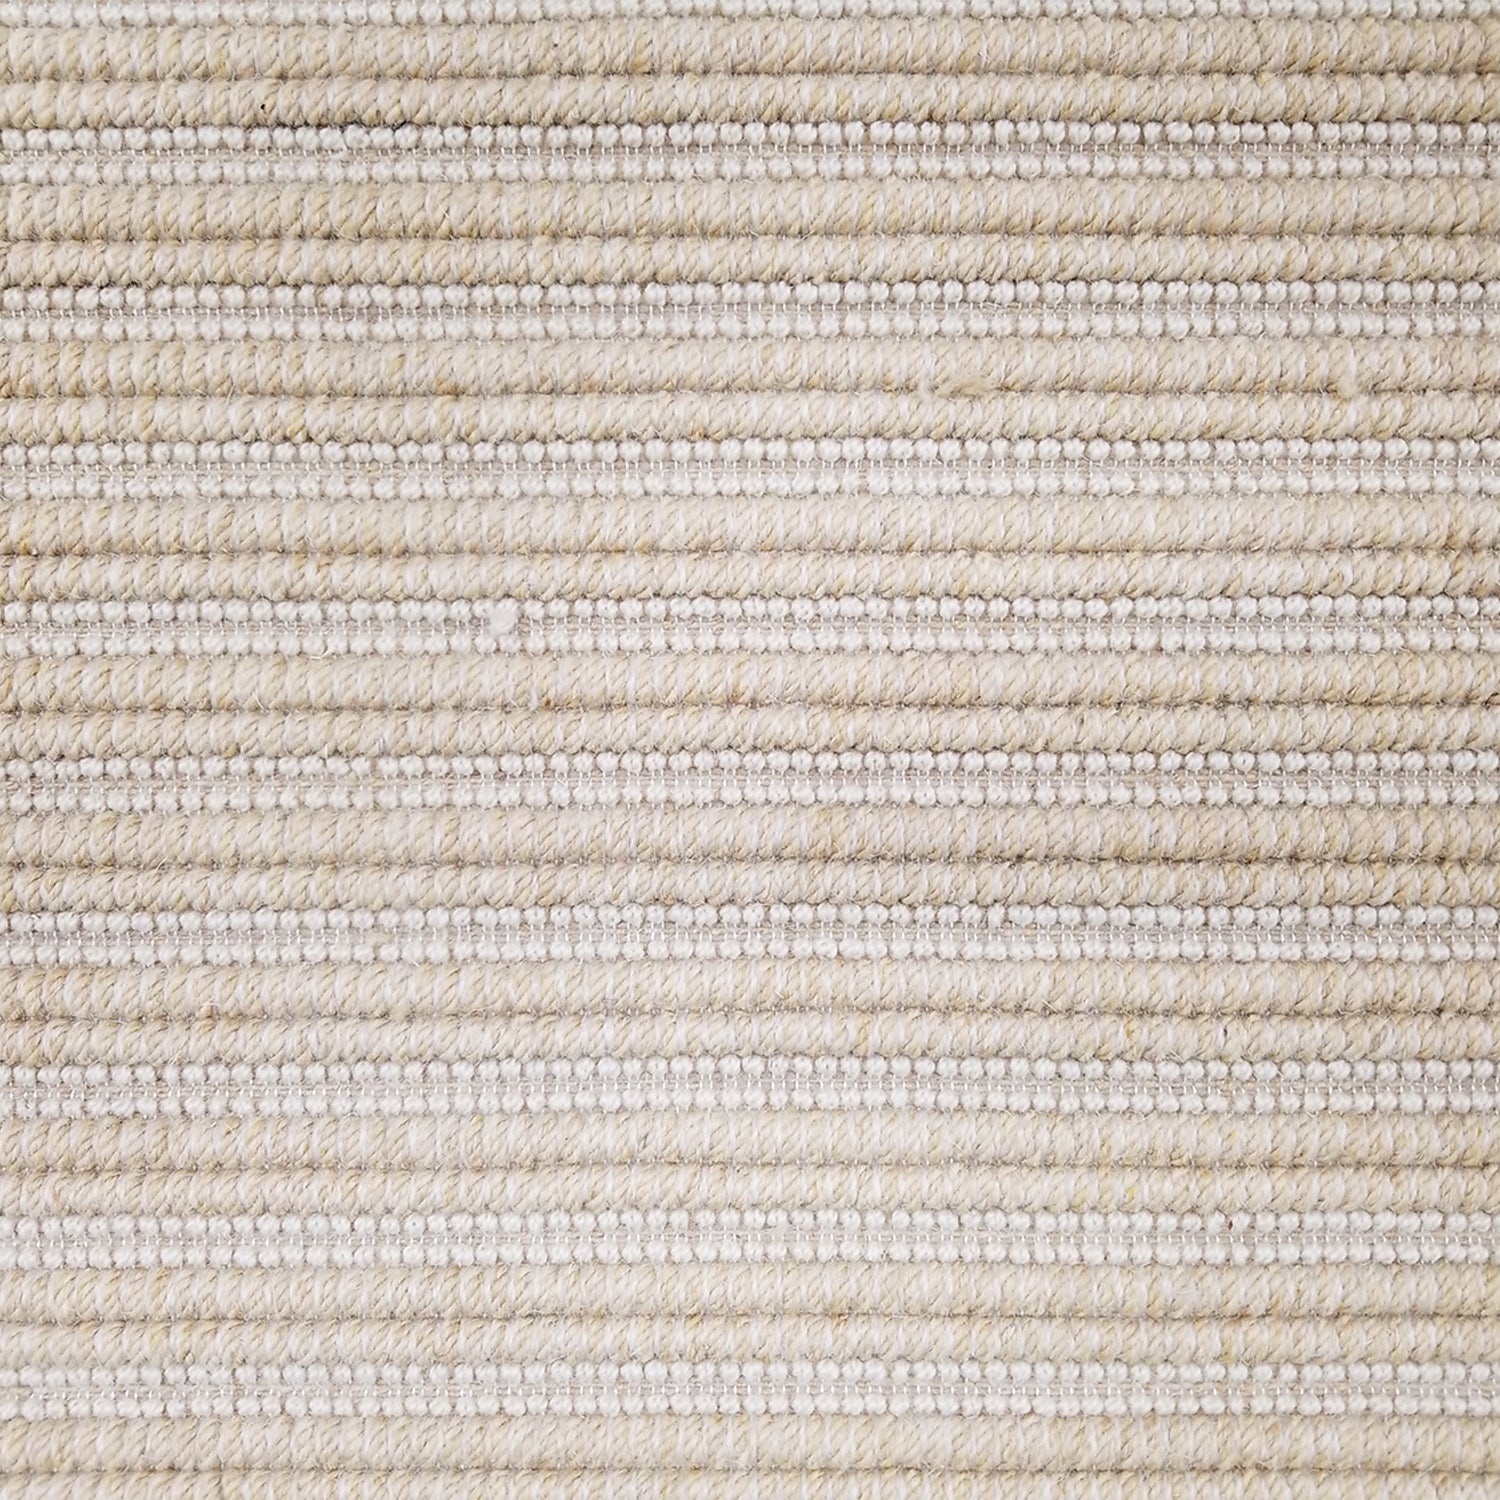 Wool broadloom carpet swatch in a textured stripe weave in a light gold and cream colorway.